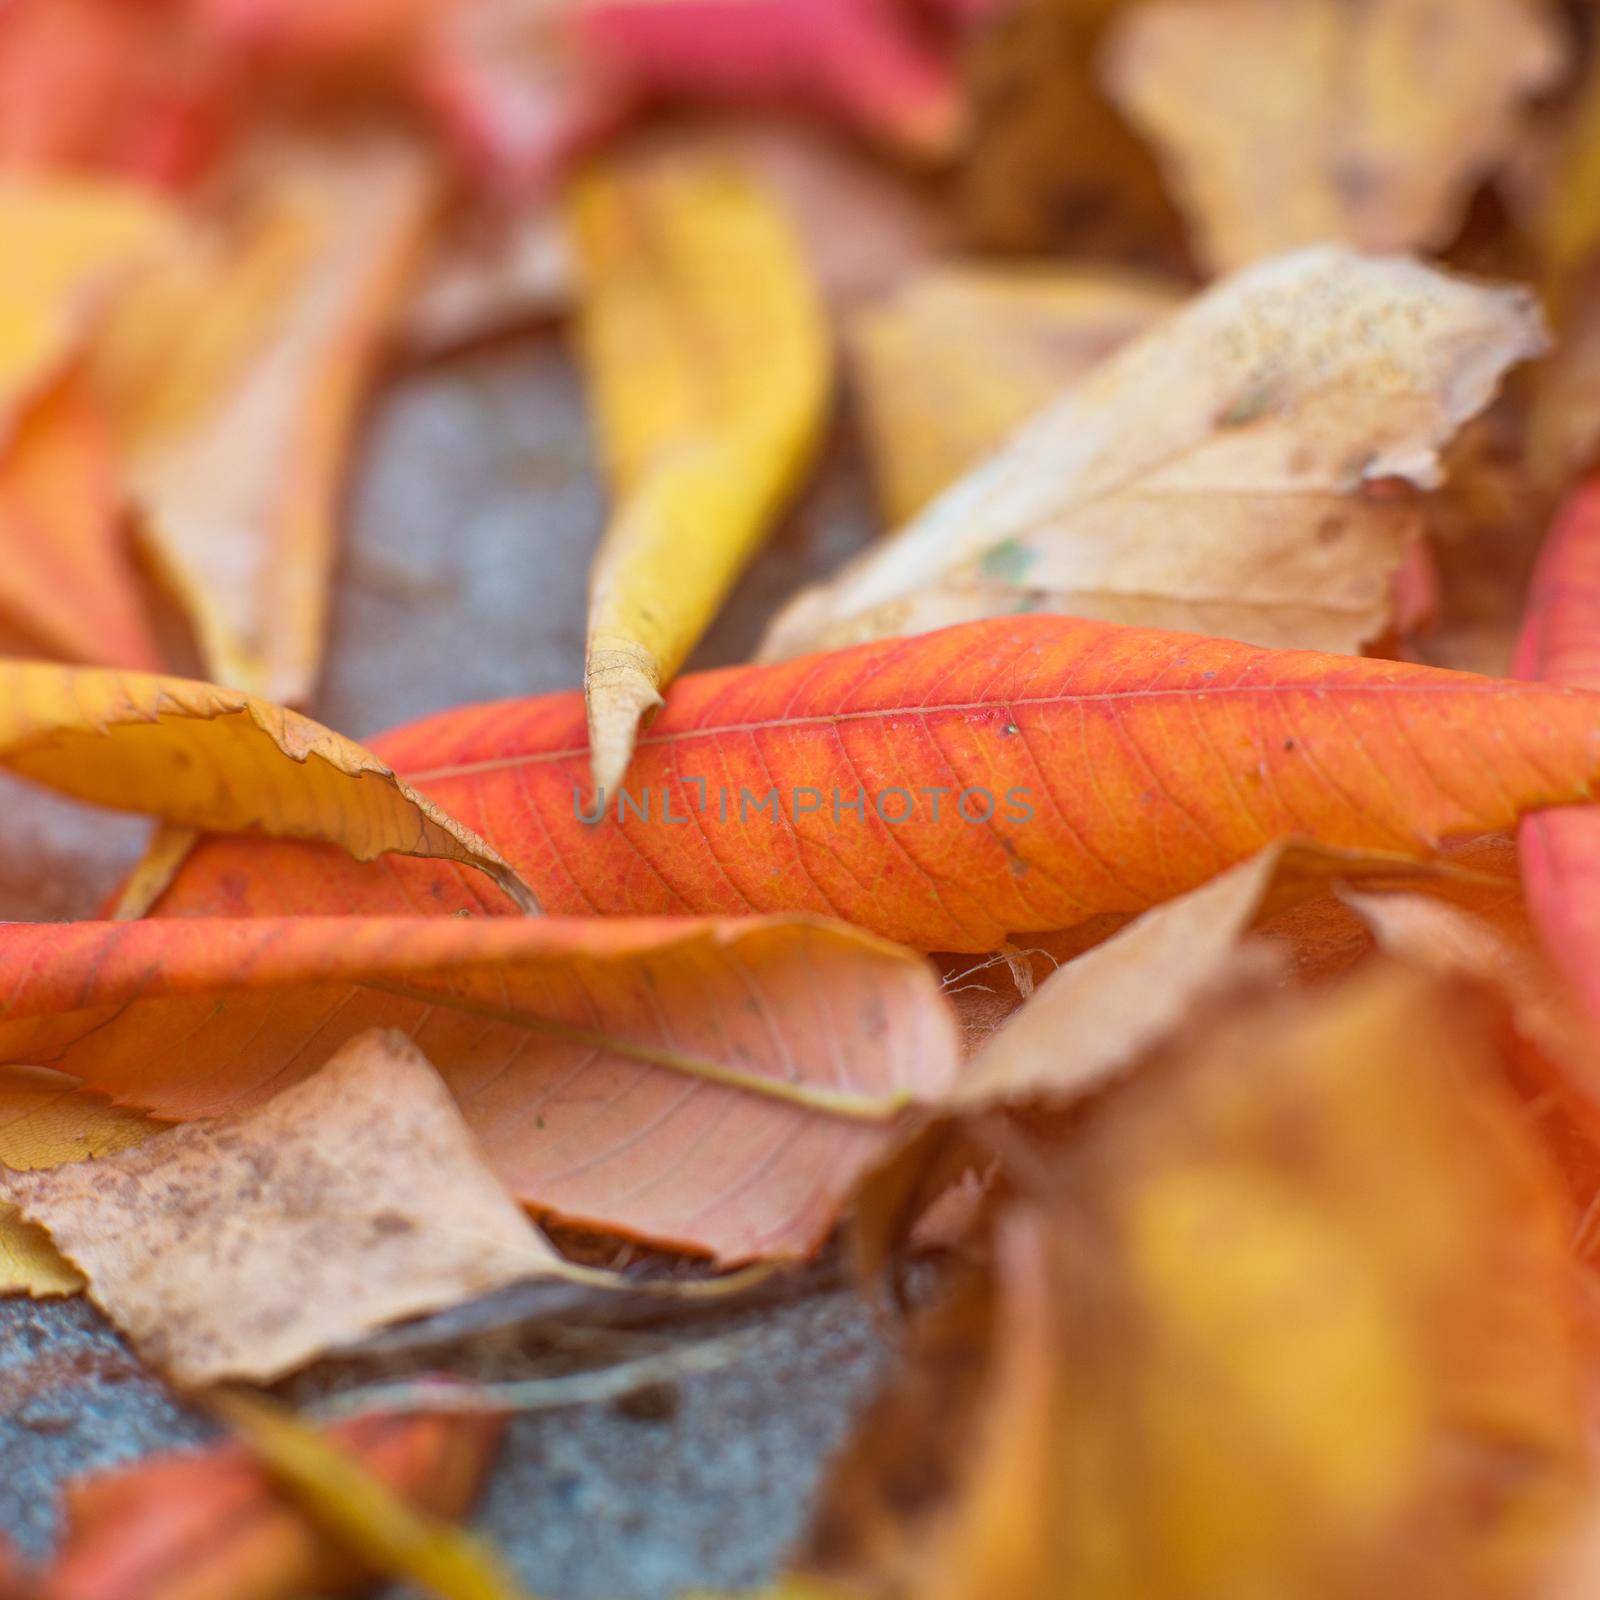 close-up photo of colorful autumn leaves